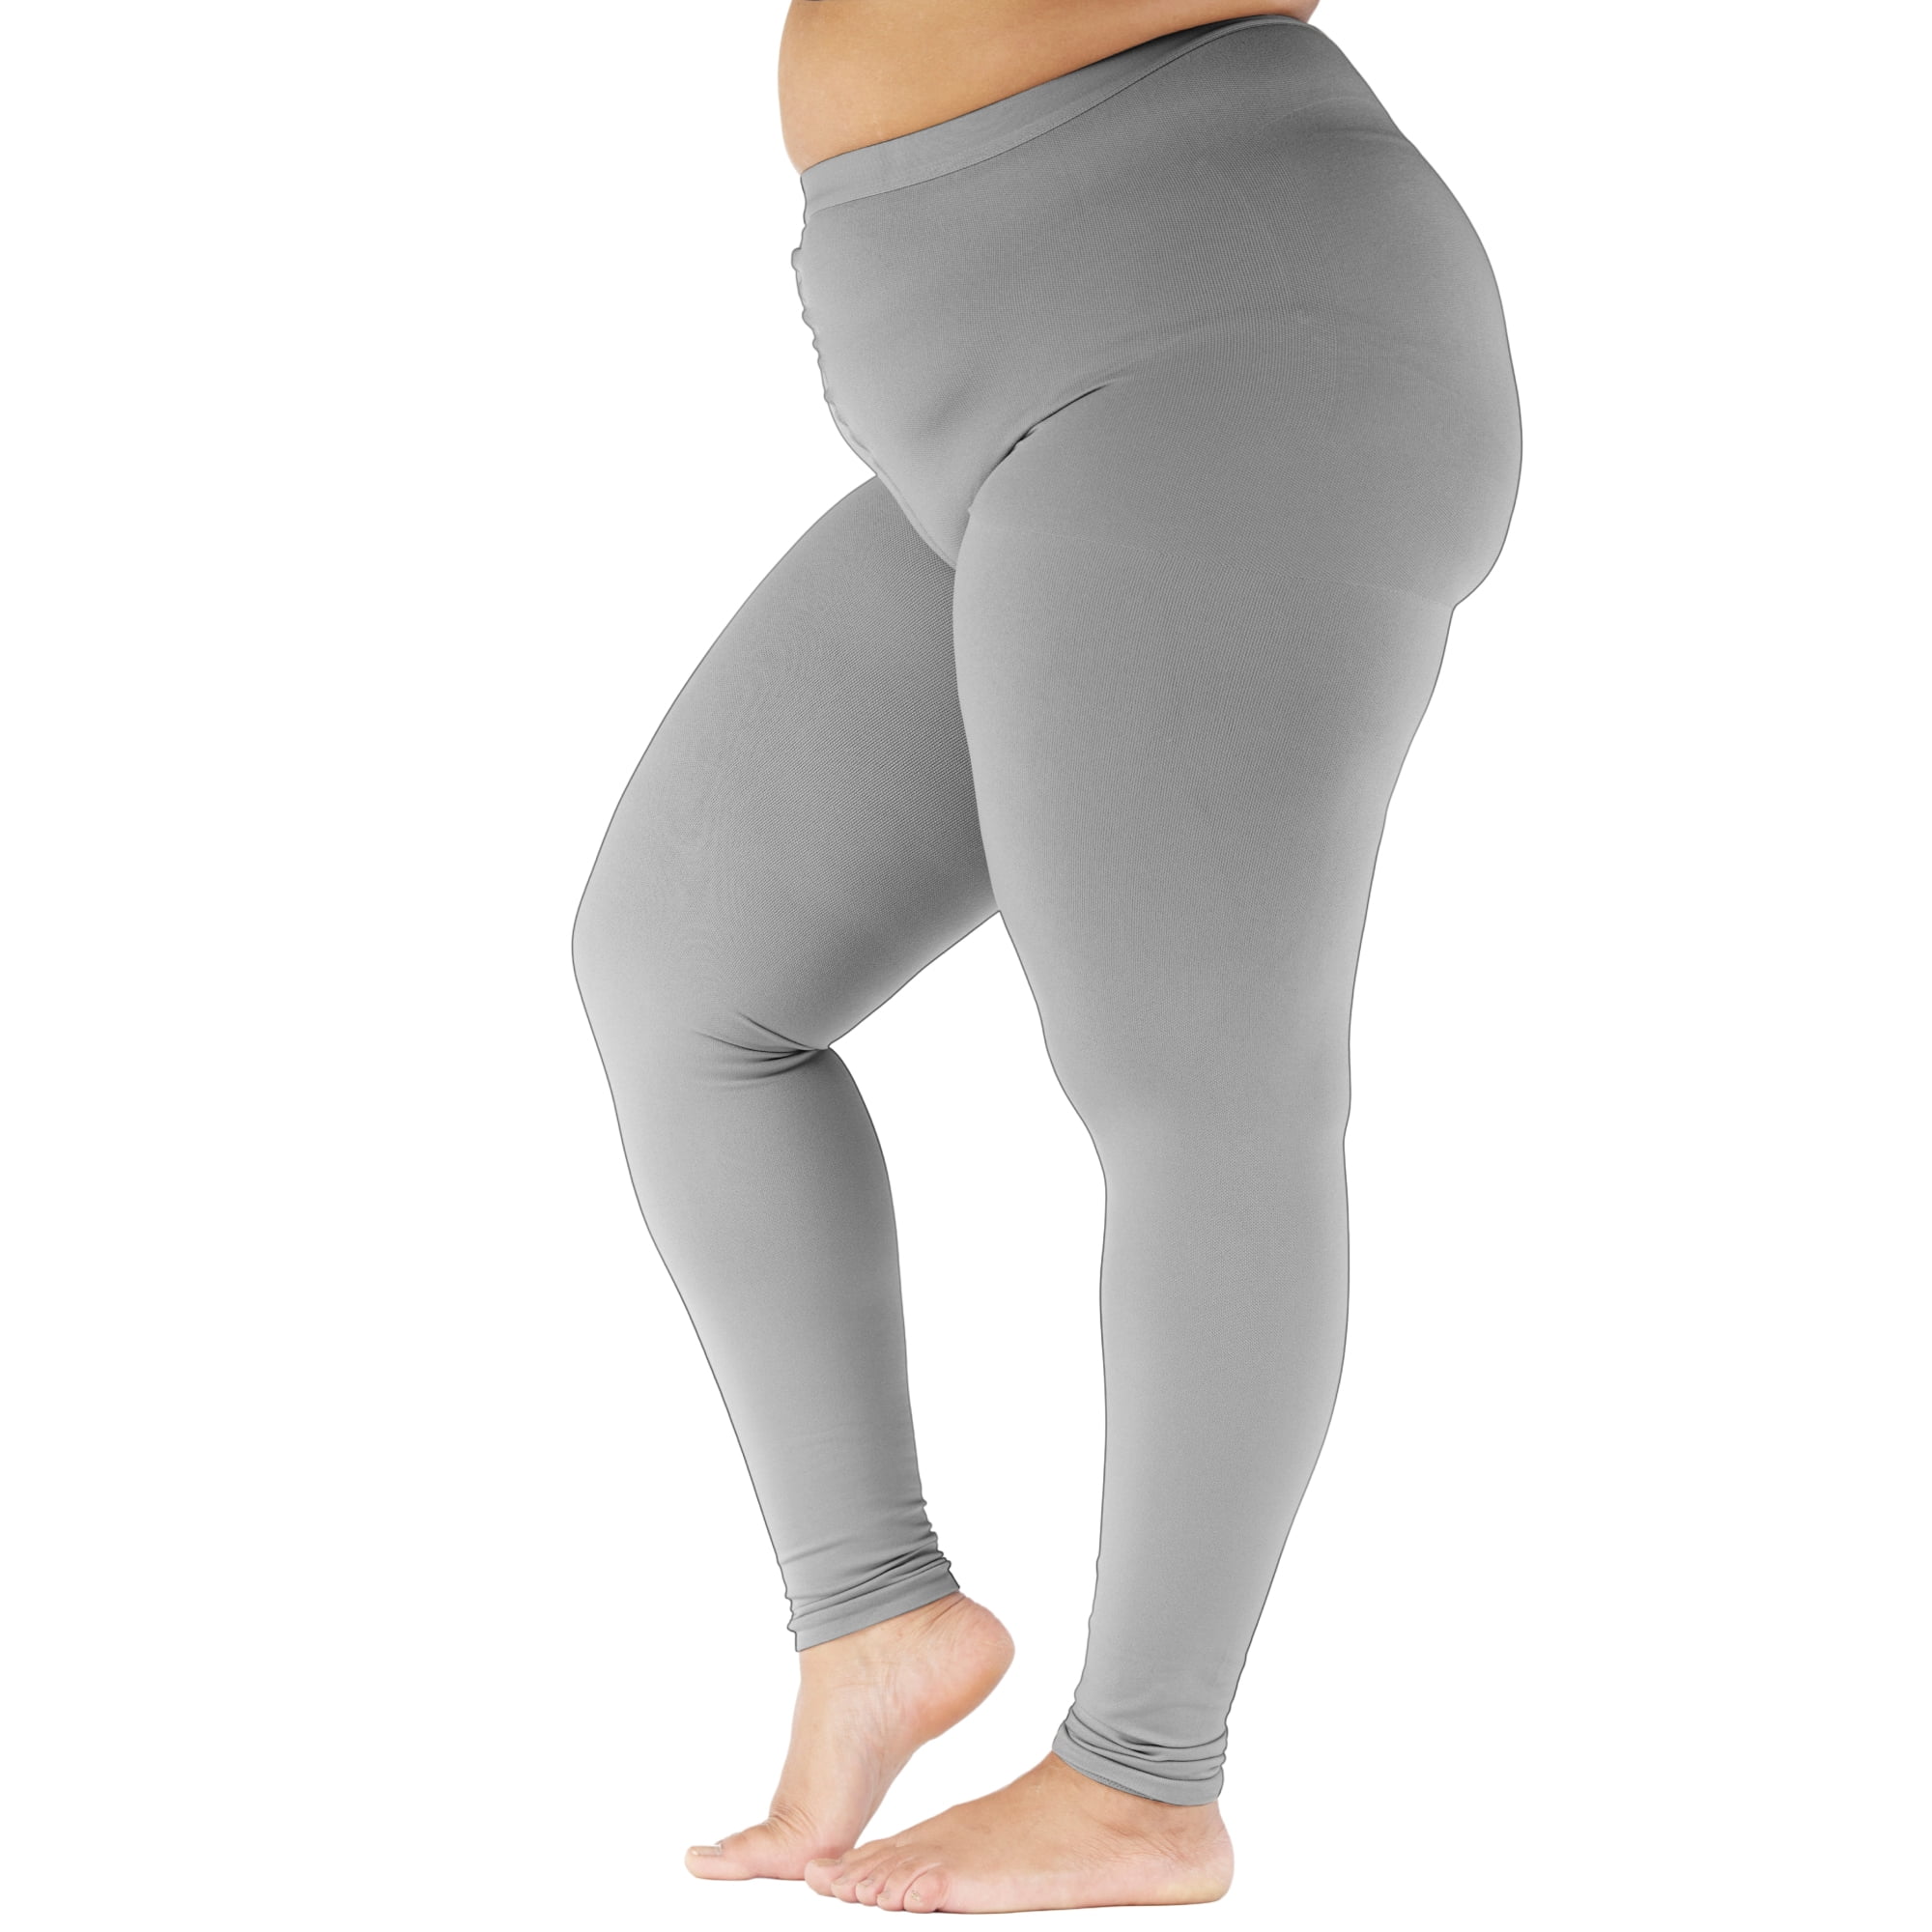 Womens Compression Leggings 20-30mmHg for Swelling & Edema - Grey, X-Large